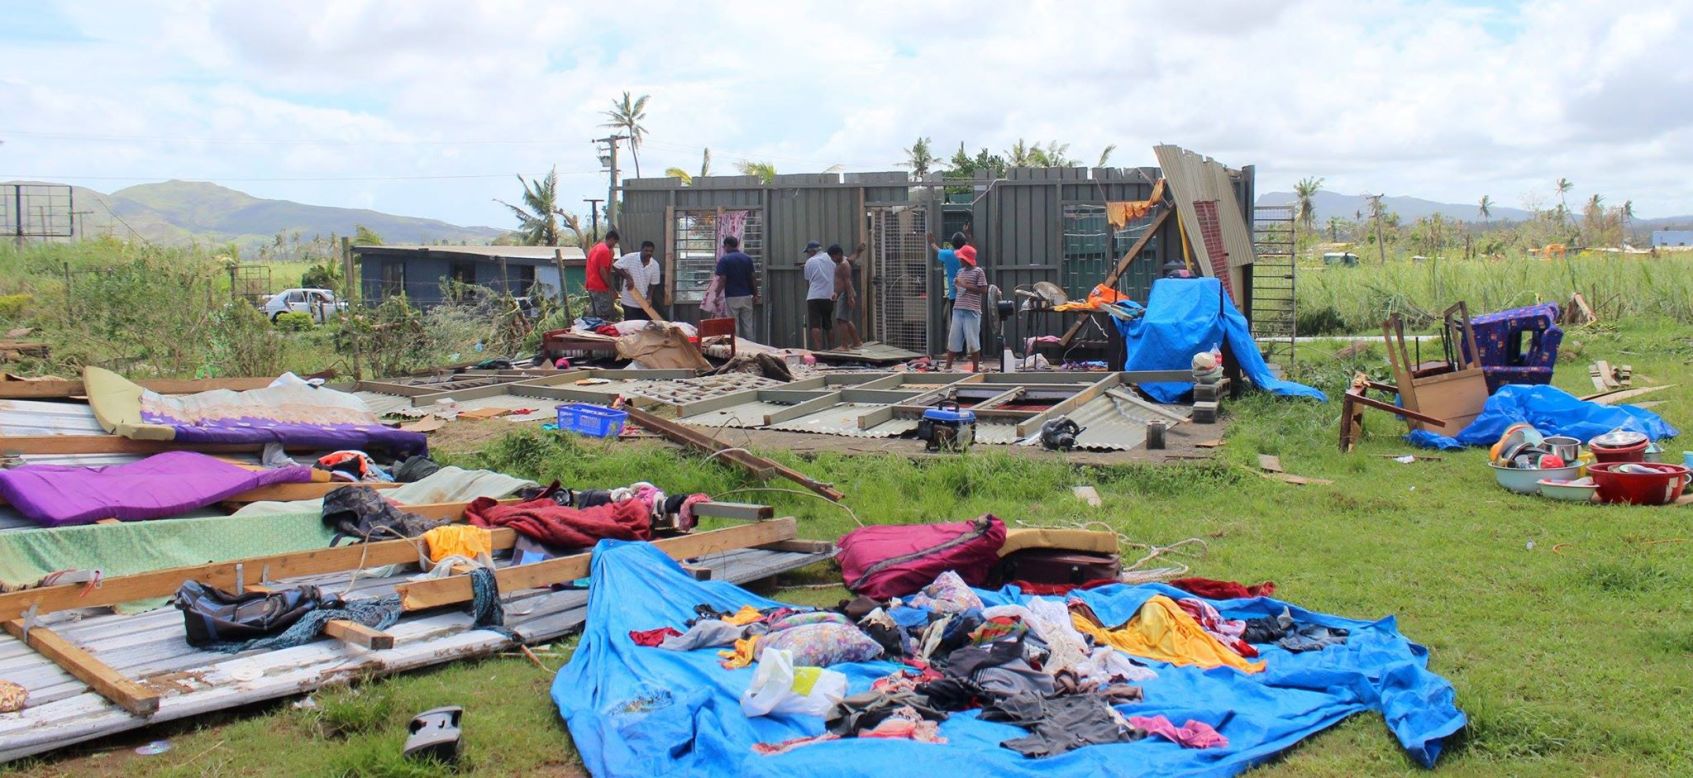 On Fiji's main island Viti Levu, most of the damage was sustained in the north and western areas, as seen in this image posted by the Fiji government on <a href="https://www.facebook.com/FijianGovernment/" target="_blank" target="_blank">Facebook.</a>